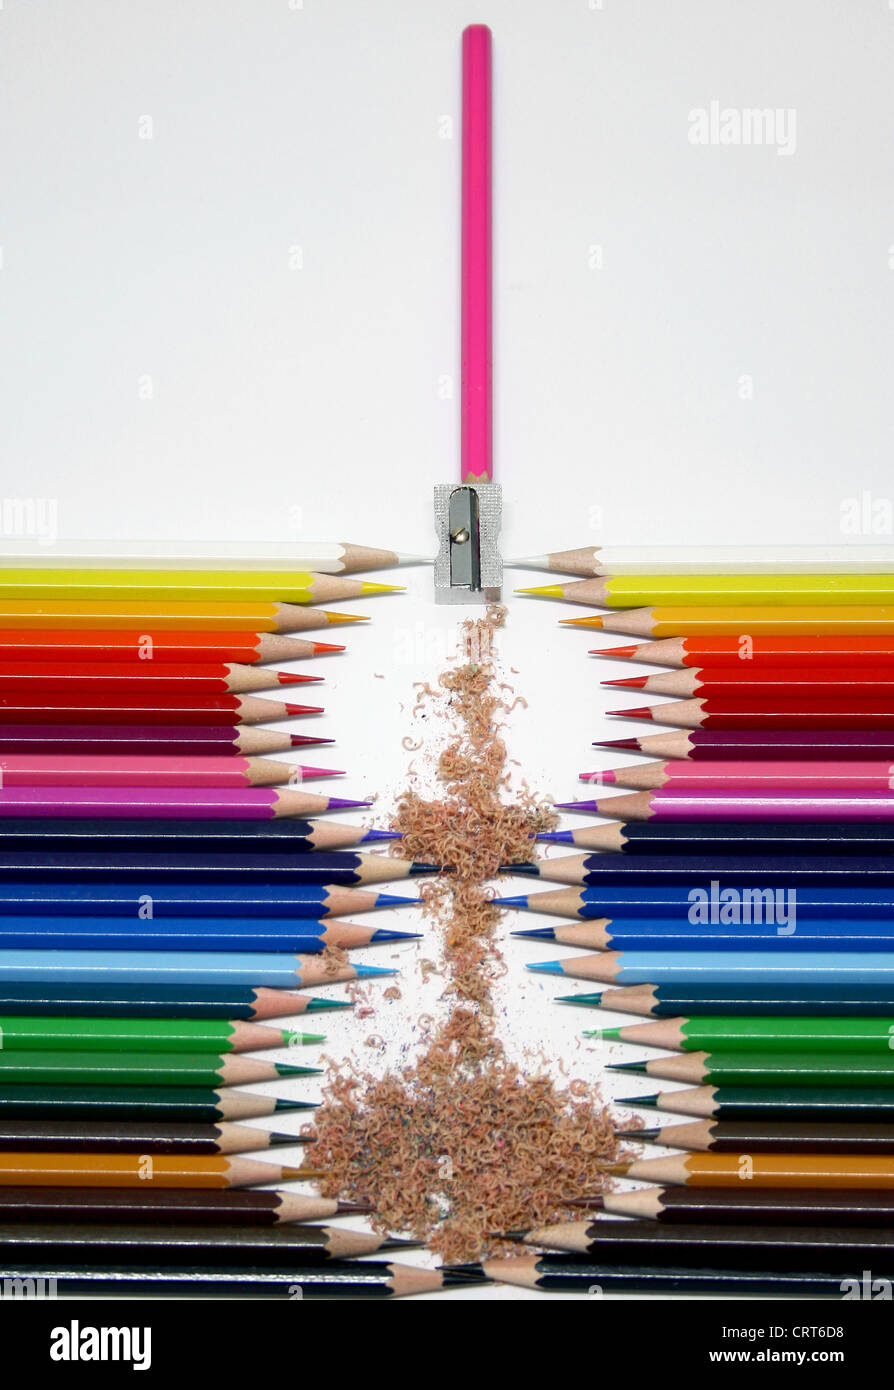 Colorful pencils and sharpener Stock Photo